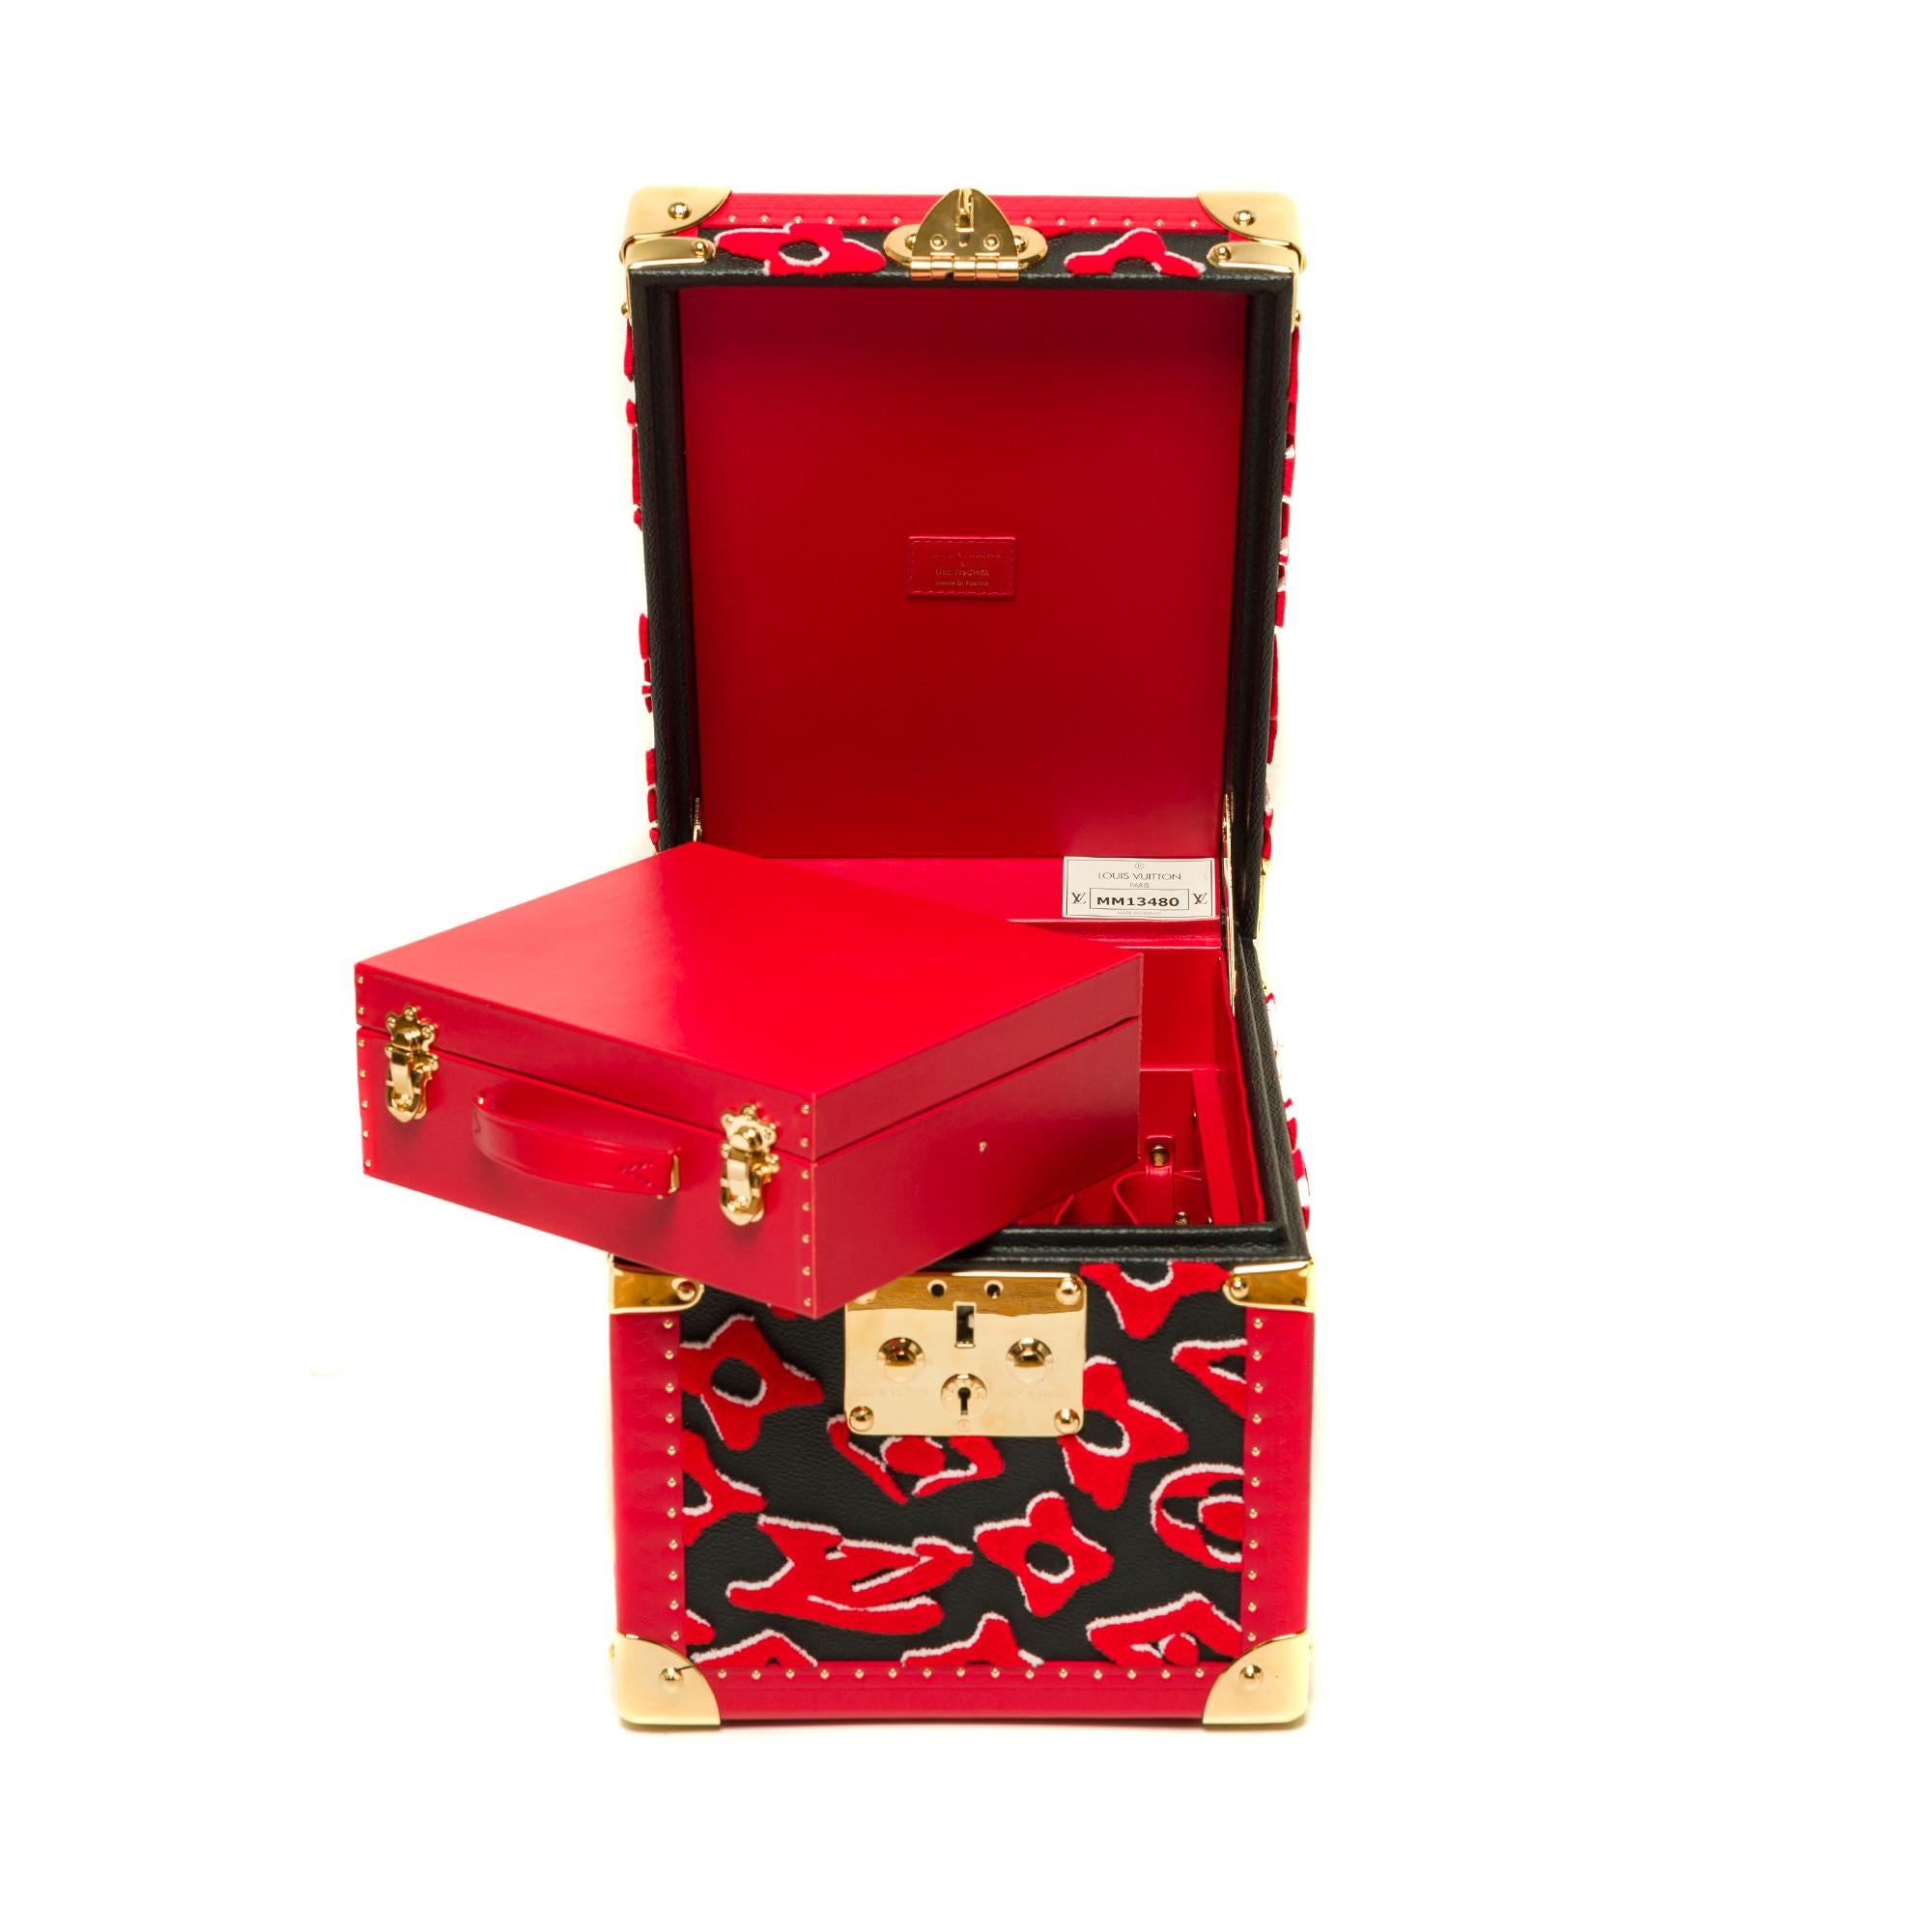 Ultra limited/Few pieces in the world/Louis Vuitton Vanity Case in red Tufa 7